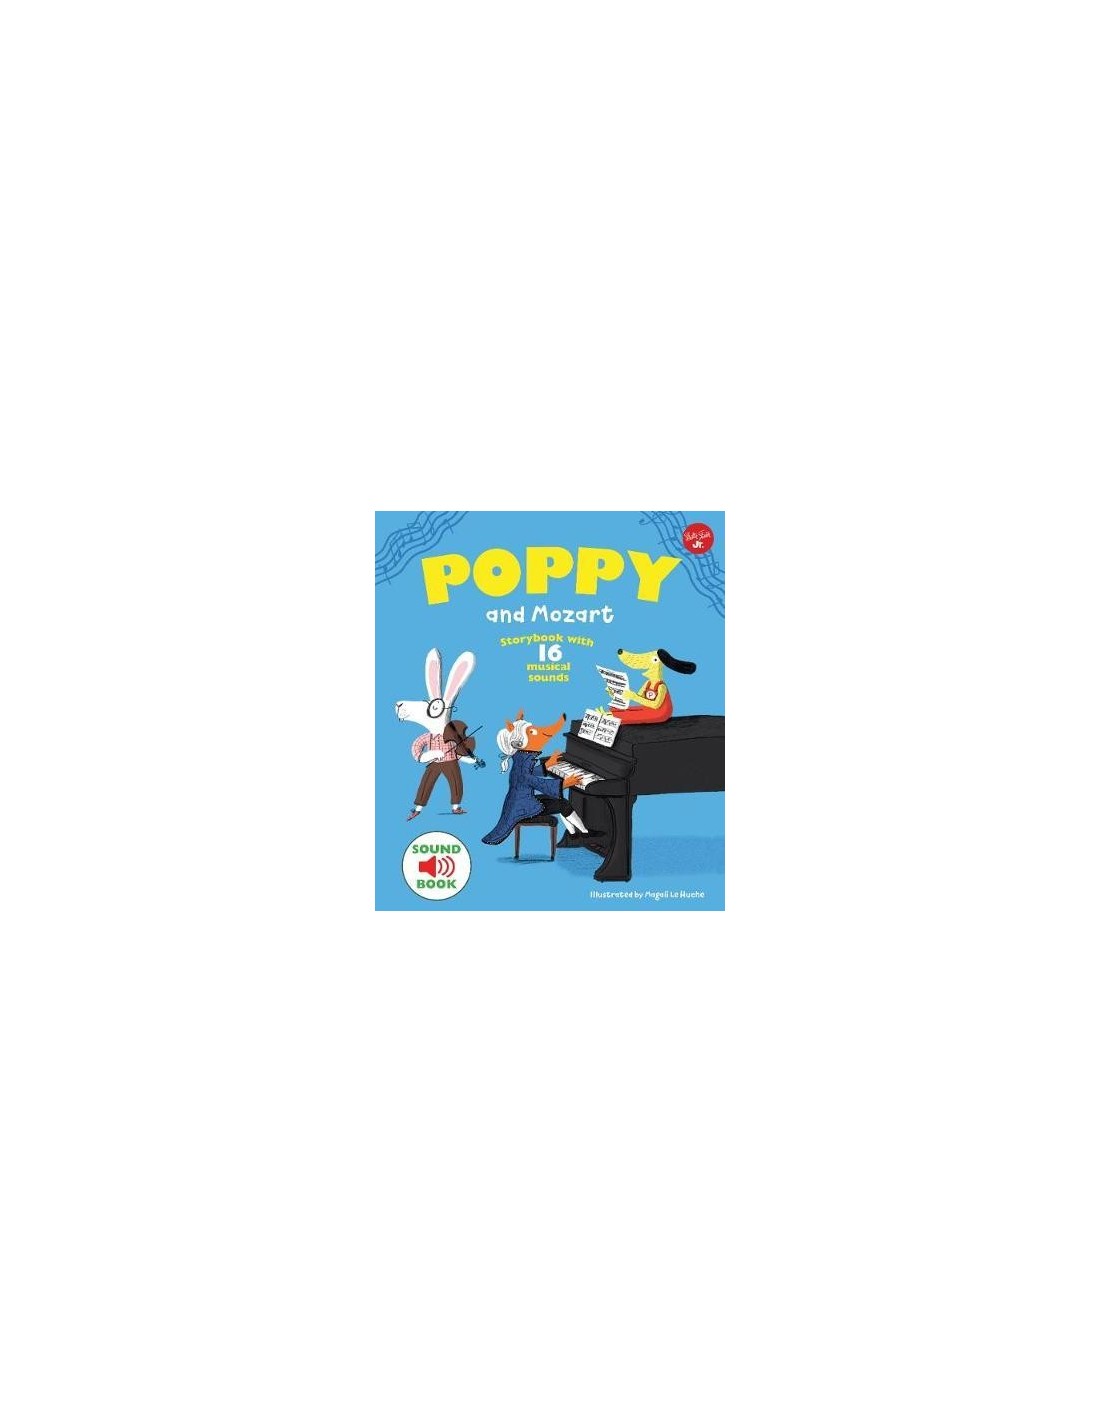 Poppy and Mozart : With 16 musical sounds!